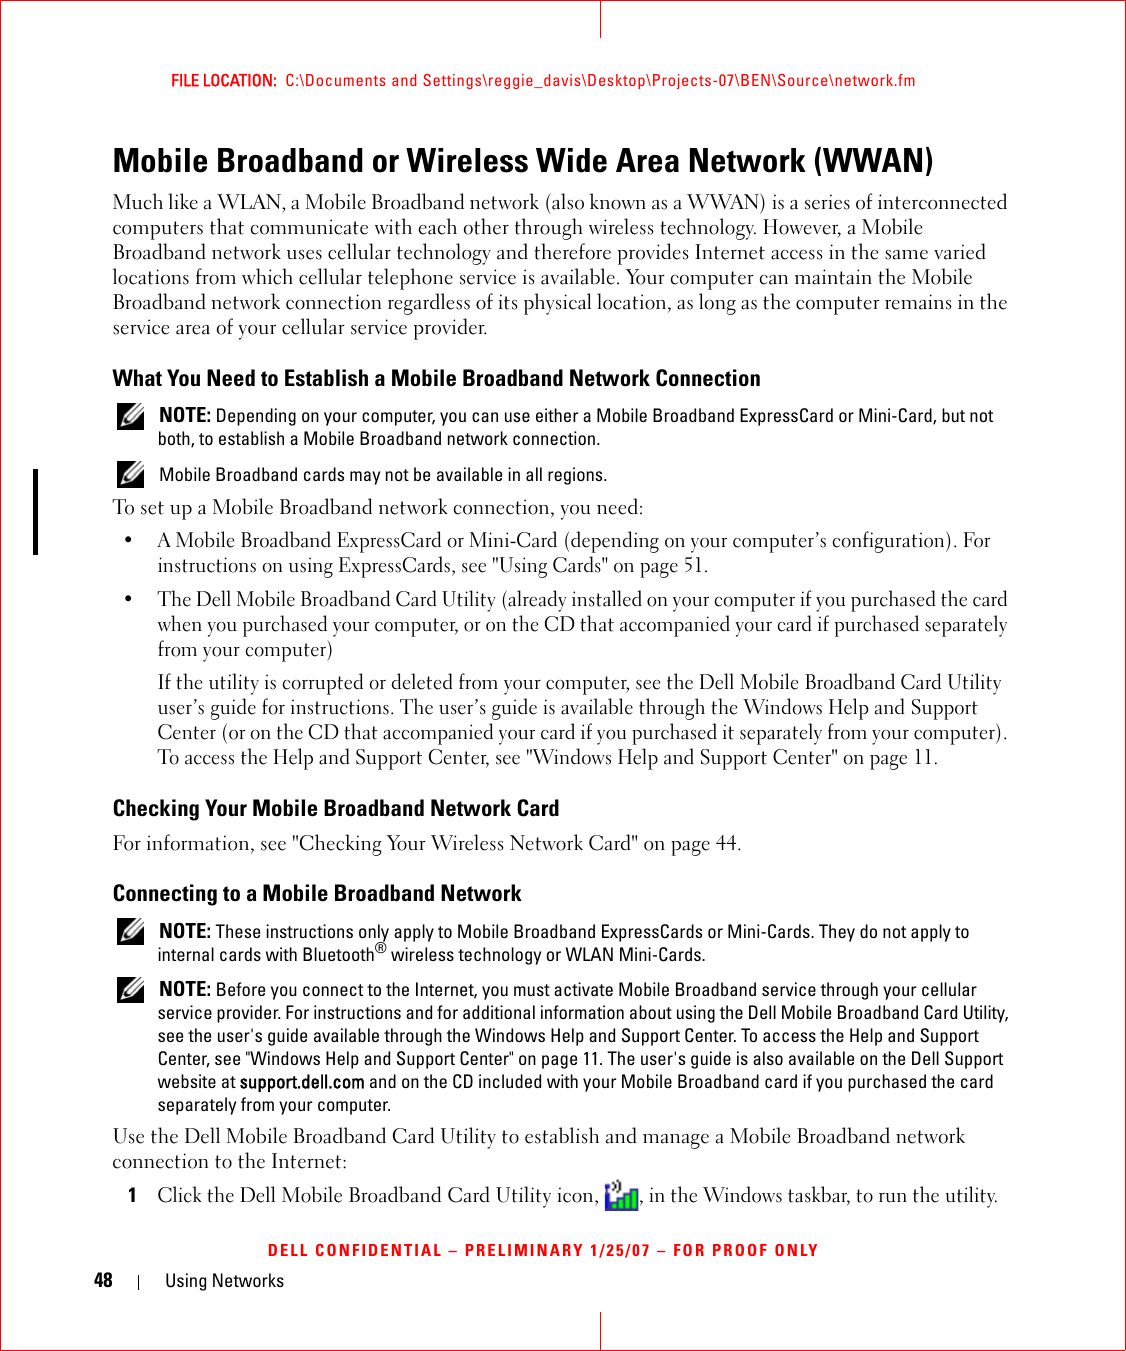 48 Using NetworksFILE LOCATION:  C:\Documents and Settings\reggie_davis\Desktop\Projects-07\BEN\Source\network.fmDELL CONFIDENTIAL – PRELIMINARY 1/25/07 – FOR PROOF ONLYMobile Broadband or Wireless Wide Area Network (WWAN)Much like a WLAN, a Mobile Broadband network (also known as a WWAN) is a series of interconnected computers that communicate with each other through wireless technology. However, a Mobile Broadband network uses cellular technology and therefore provides Internet access in the same varied locations from which cellular telephone service is available. Your computer can maintain the Mobile Broadband network connection regardless of its physical location, as long as the computer remains in the service area of your cellular service provider.What You Need to Establish a Mobile Broadband Network Connection NOTE: Depending on your computer, you can use either a Mobile Broadband ExpressCard or Mini-Card, but not both, to establish a Mobile Broadband network connection. Mobile Broadband cards may not be available in all regions.To set up a Mobile Broadband network connection, you need:• A Mobile Broadband ExpressCard or Mini-Card (depending on your computer’s configuration). For instructions on using ExpressCards, see &quot;Using Cards&quot; on page 51. • The Dell Mobile Broadband Card Utility (already installed on your computer if you purchased the card when you purchased your computer, or on the CD that accompanied your card if purchased separately from your computer)If the utility is corrupted or deleted from your computer, see the Dell Mobile Broadband Card Utility user’s guide for instructions. The user’s guide is available through the Windows Help and Support Center (or on the CD that accompanied your card if you purchased it separately from your computer). To access the Help and Support Center, see &quot;Windows Help and Support Center&quot; on page 11.Checking Your Mobile Broadband Network CardFor information, see &quot;Checking Your Wireless Network Card&quot; on page 44.Connecting to a Mobile Broadband Network NOTE: These instructions only apply to Mobile Broadband ExpressCards or Mini-Cards. They do not apply to internal cards with Bluetooth® wireless technology or WLAN Mini-Cards. NOTE: Before you connect to the Internet, you must activate Mobile Broadband service through your cellular service provider. For instructions and for additional information about using the Dell Mobile Broadband Card Utility, see the user&apos;s guide available through the Windows Help and Support Center. To access the Help and Support Center, see &quot;Windows Help and Support Center&quot; on page 11. The user&apos;s guide is also available on the Dell Support website at support.dell.com and on the CD included with your Mobile Broadband card if you purchased the card separately from your computer.Use the Dell Mobile Broadband Card Utility to establish and manage a Mobile Broadband network connection to the Internet:1Click the Dell Mobile Broadband Card Utility icon, , in the Windows taskbar, to run the utility.